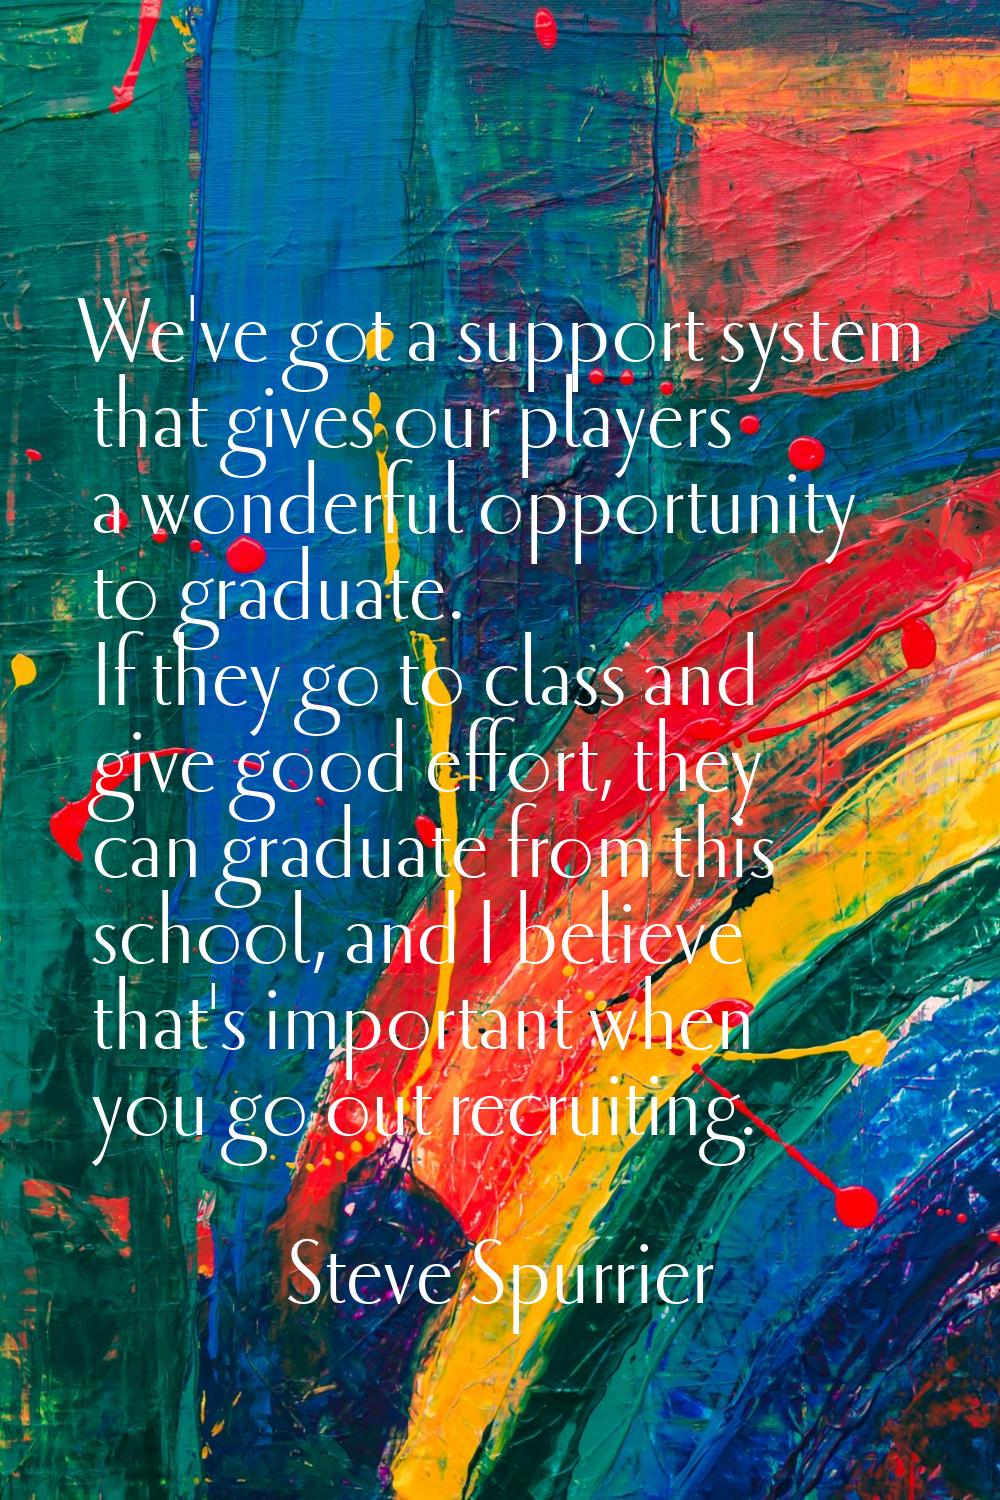 We've got a support system that gives our players a wonderful opportunity to graduate. If they go t